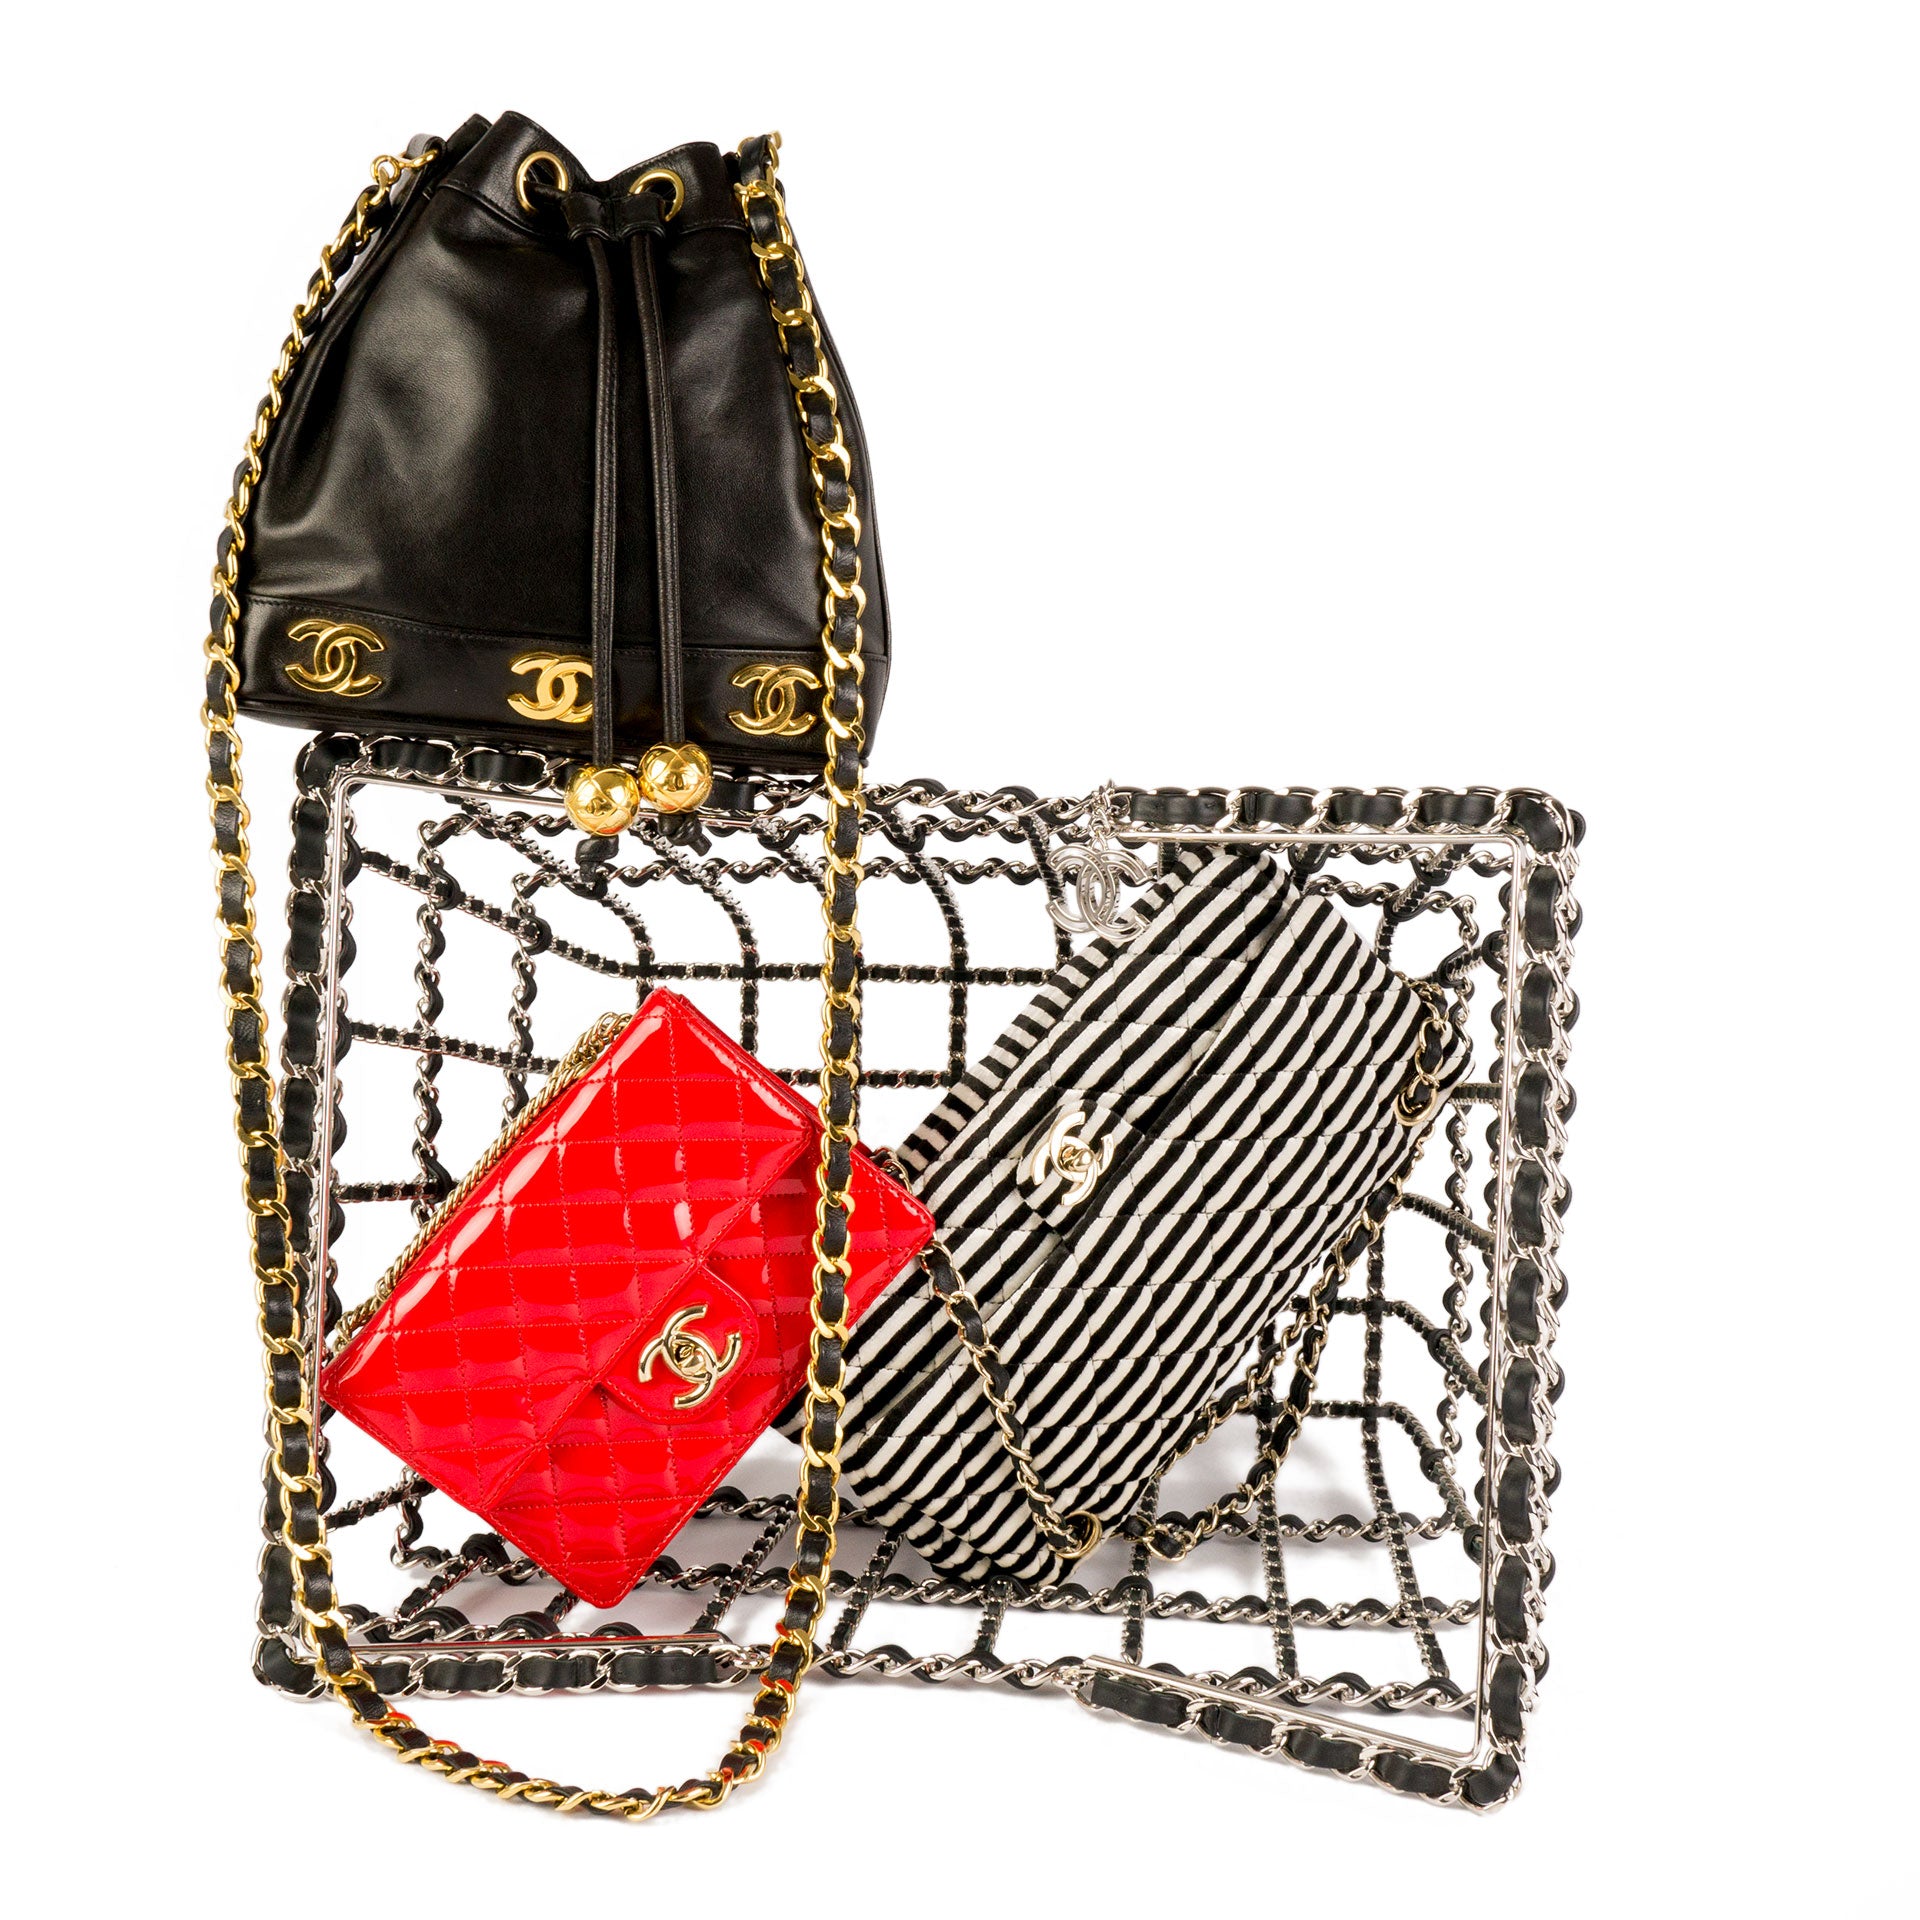 Chanel's Fall 2014 Bags Were as Fantastically Crazy as We've Come to Expect  - PurseBlog